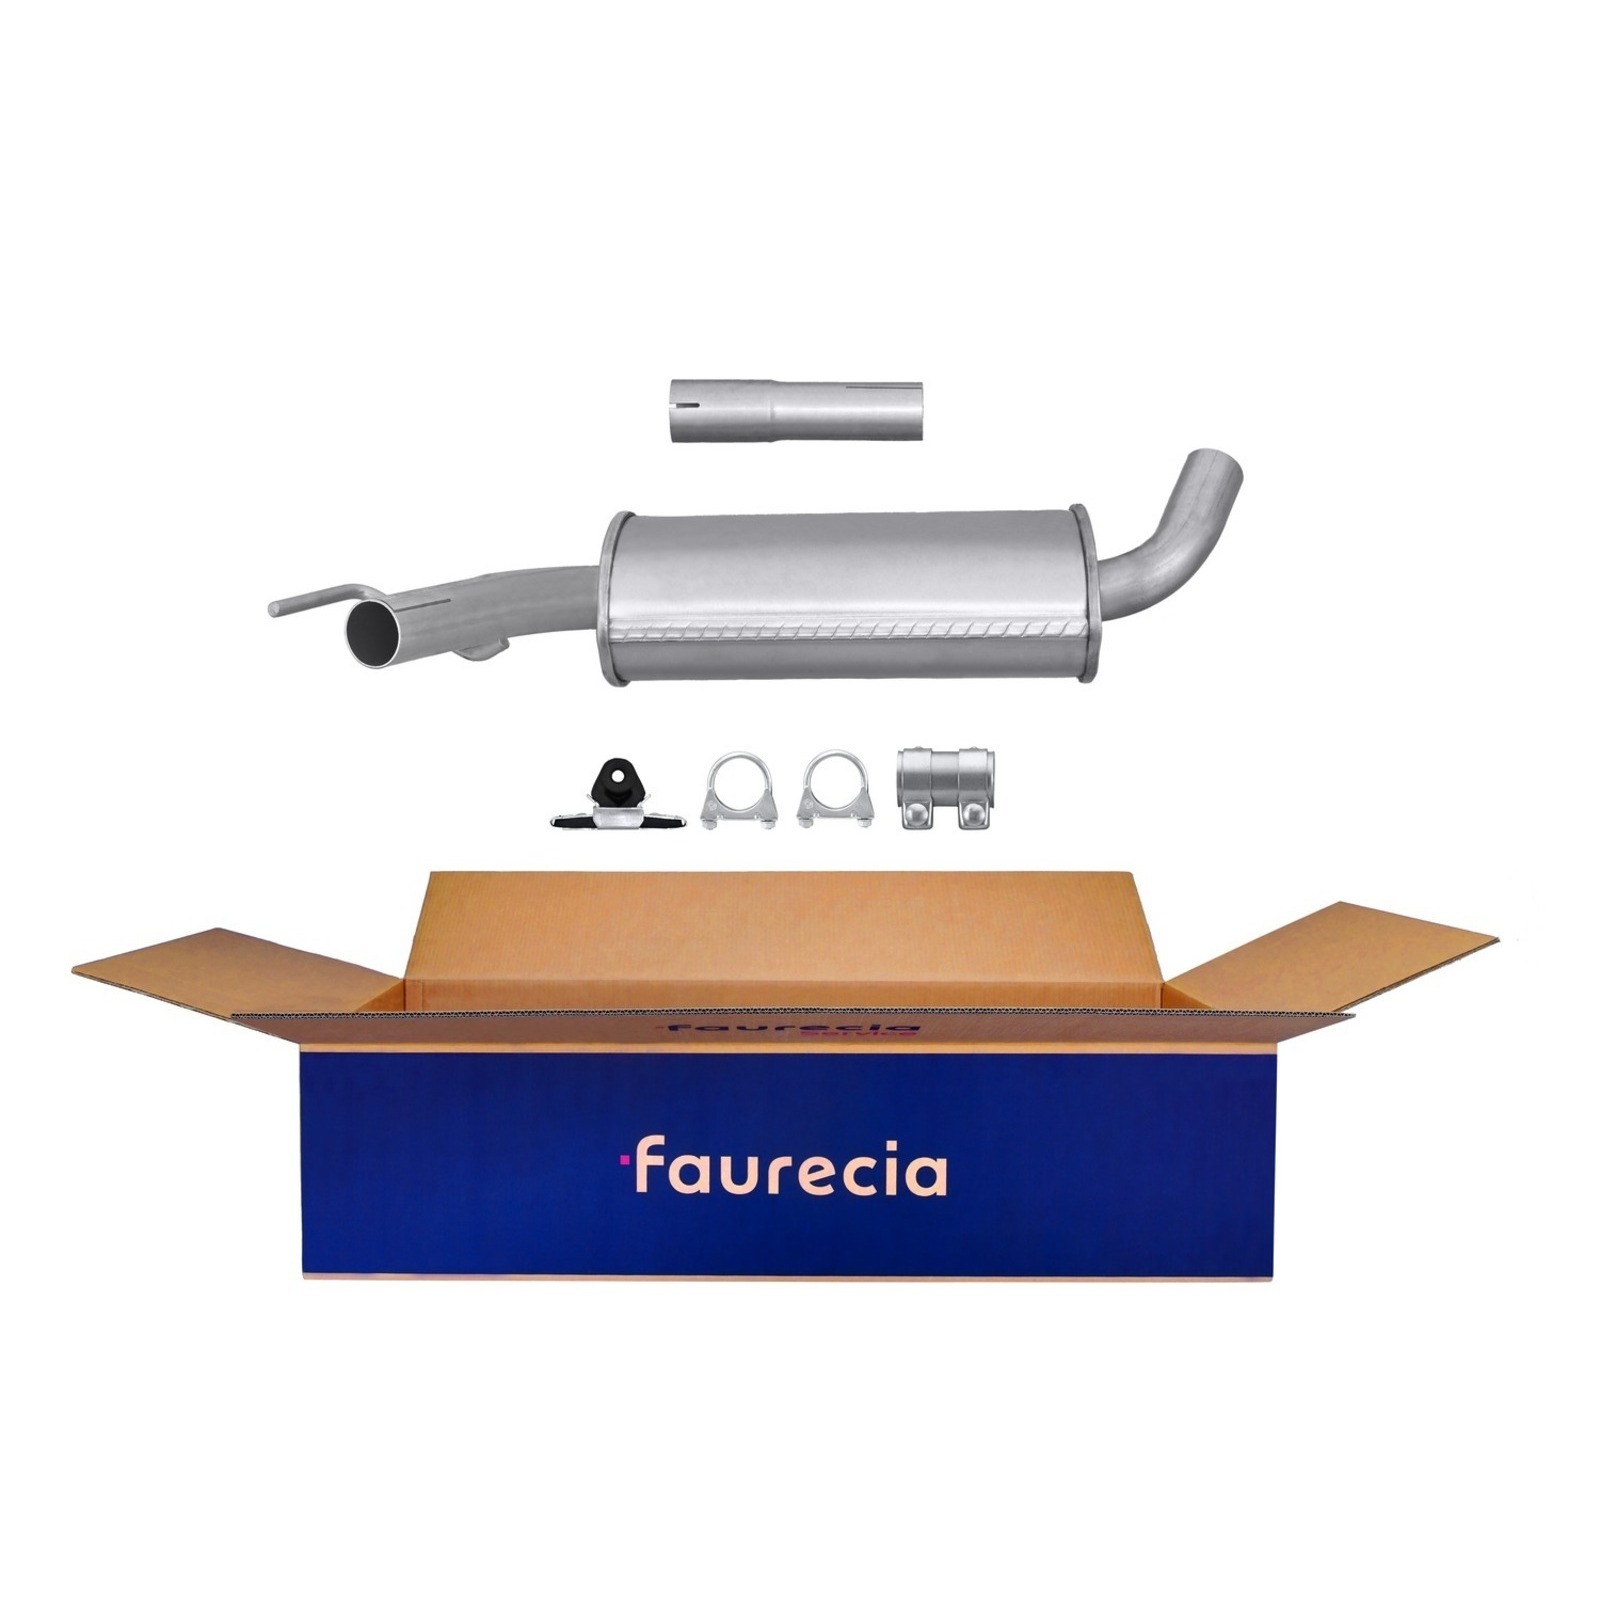 HELLA Centre Muffler Easy2Fit – PARTNERED with Faurecia